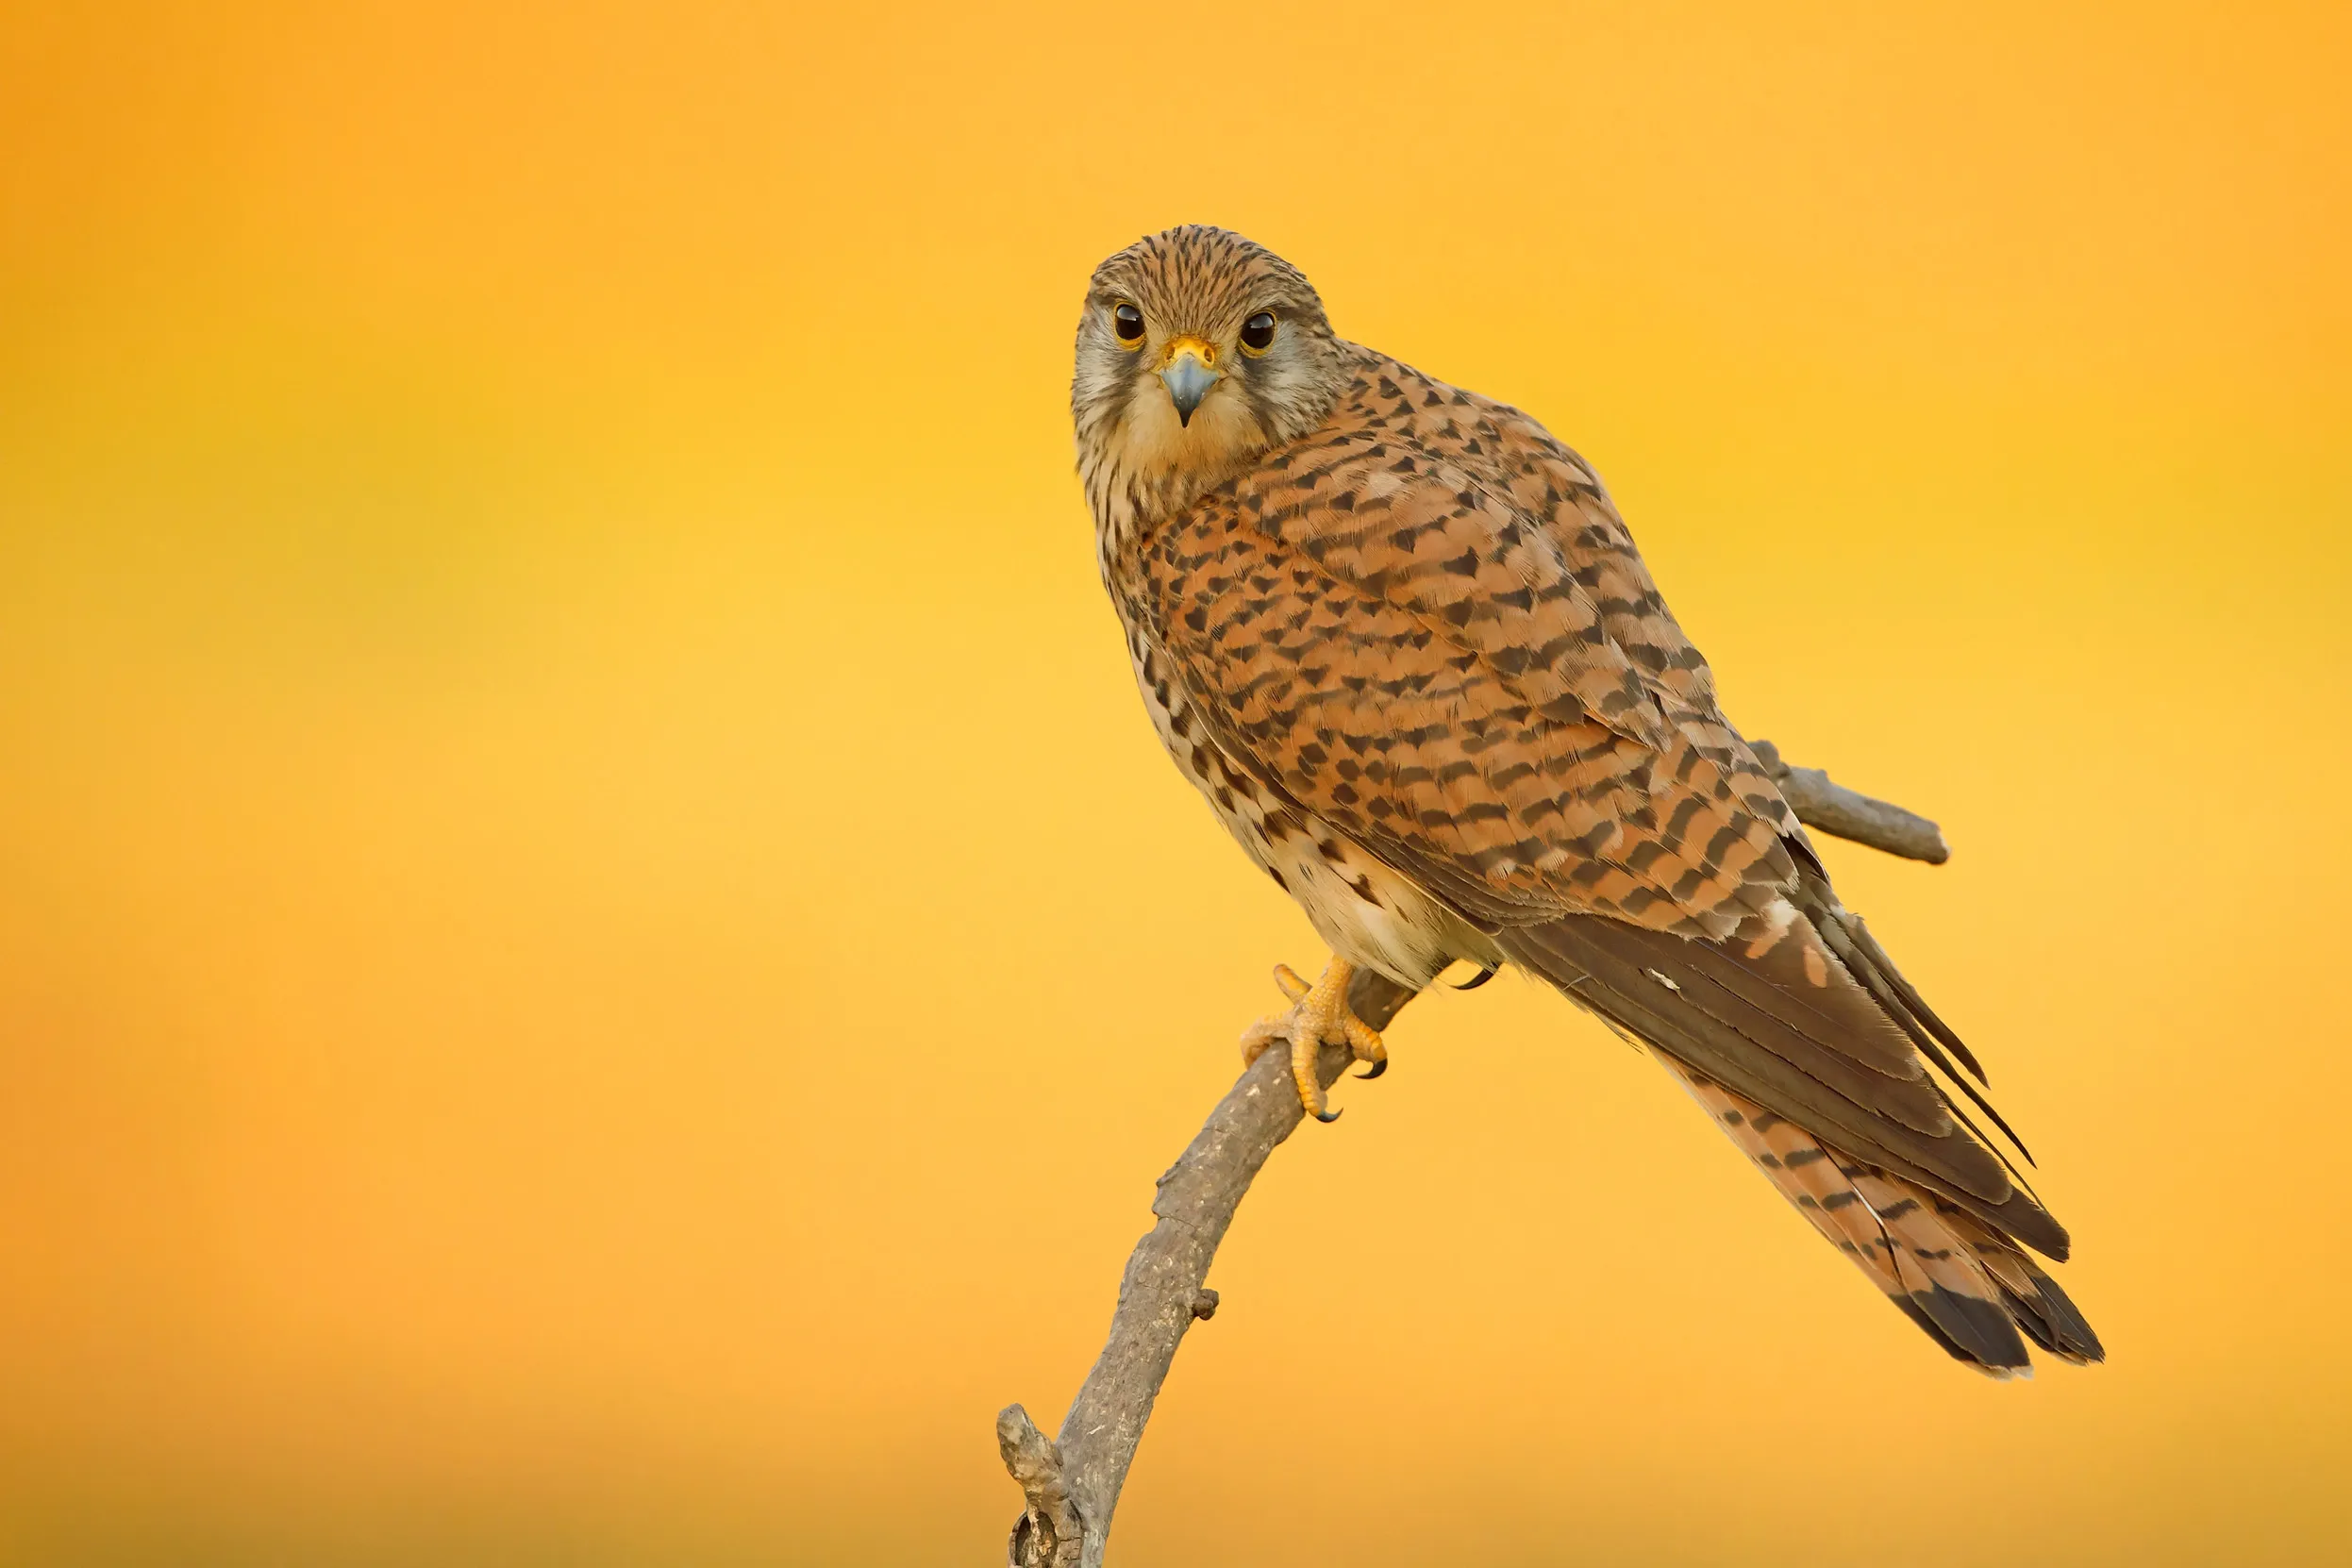 A lone female Kestrel perched on a small branch with a golden orange background.